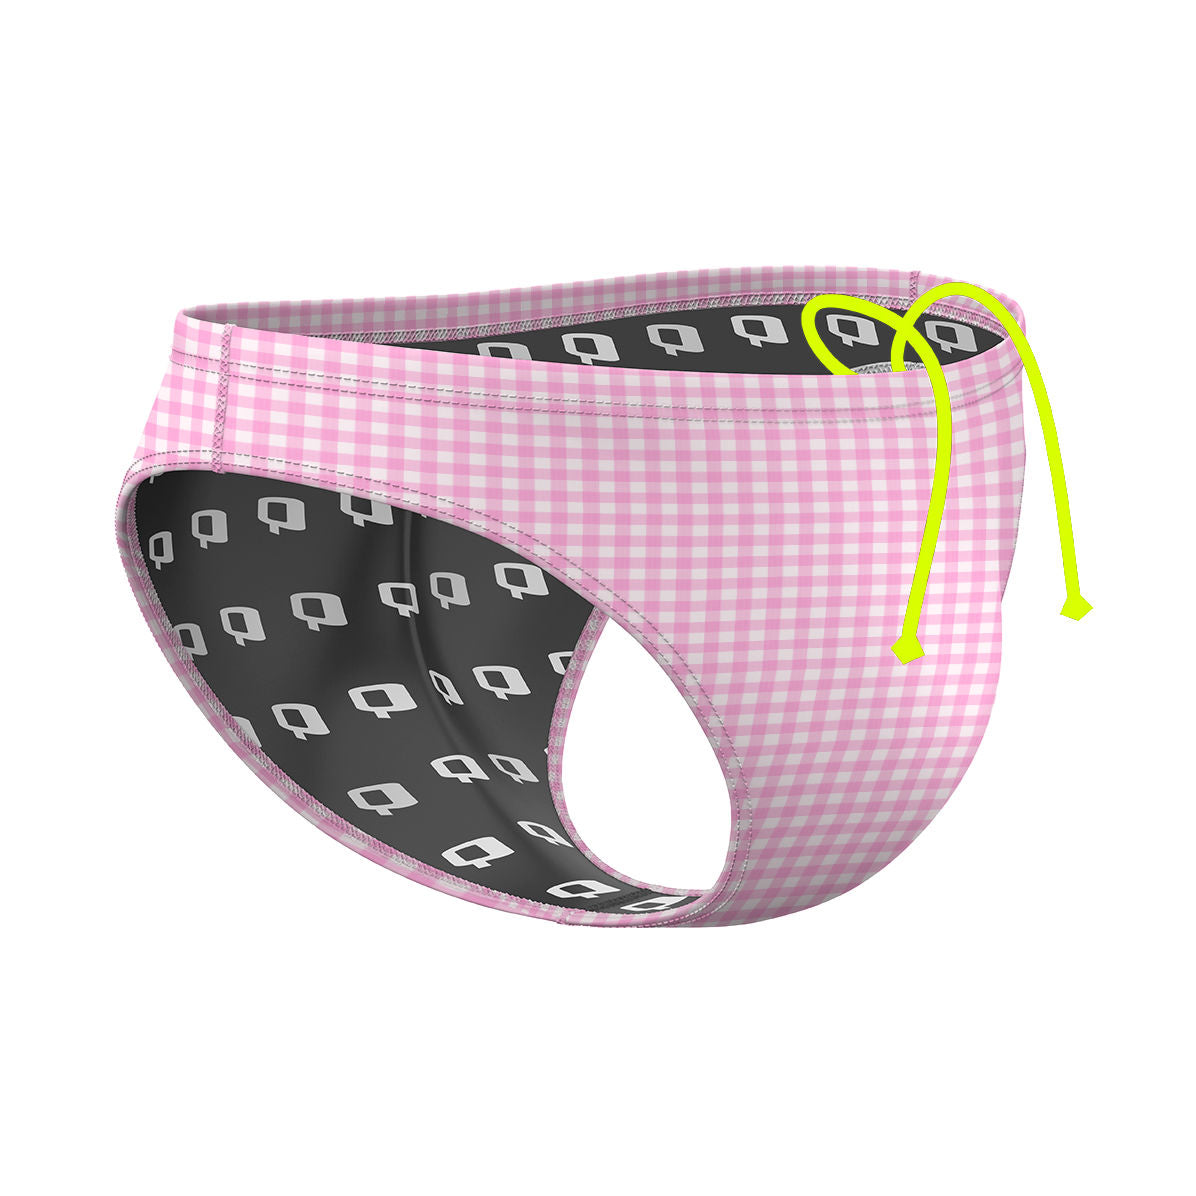 Pink Plaid - Waterpolo Brief Swimsuit